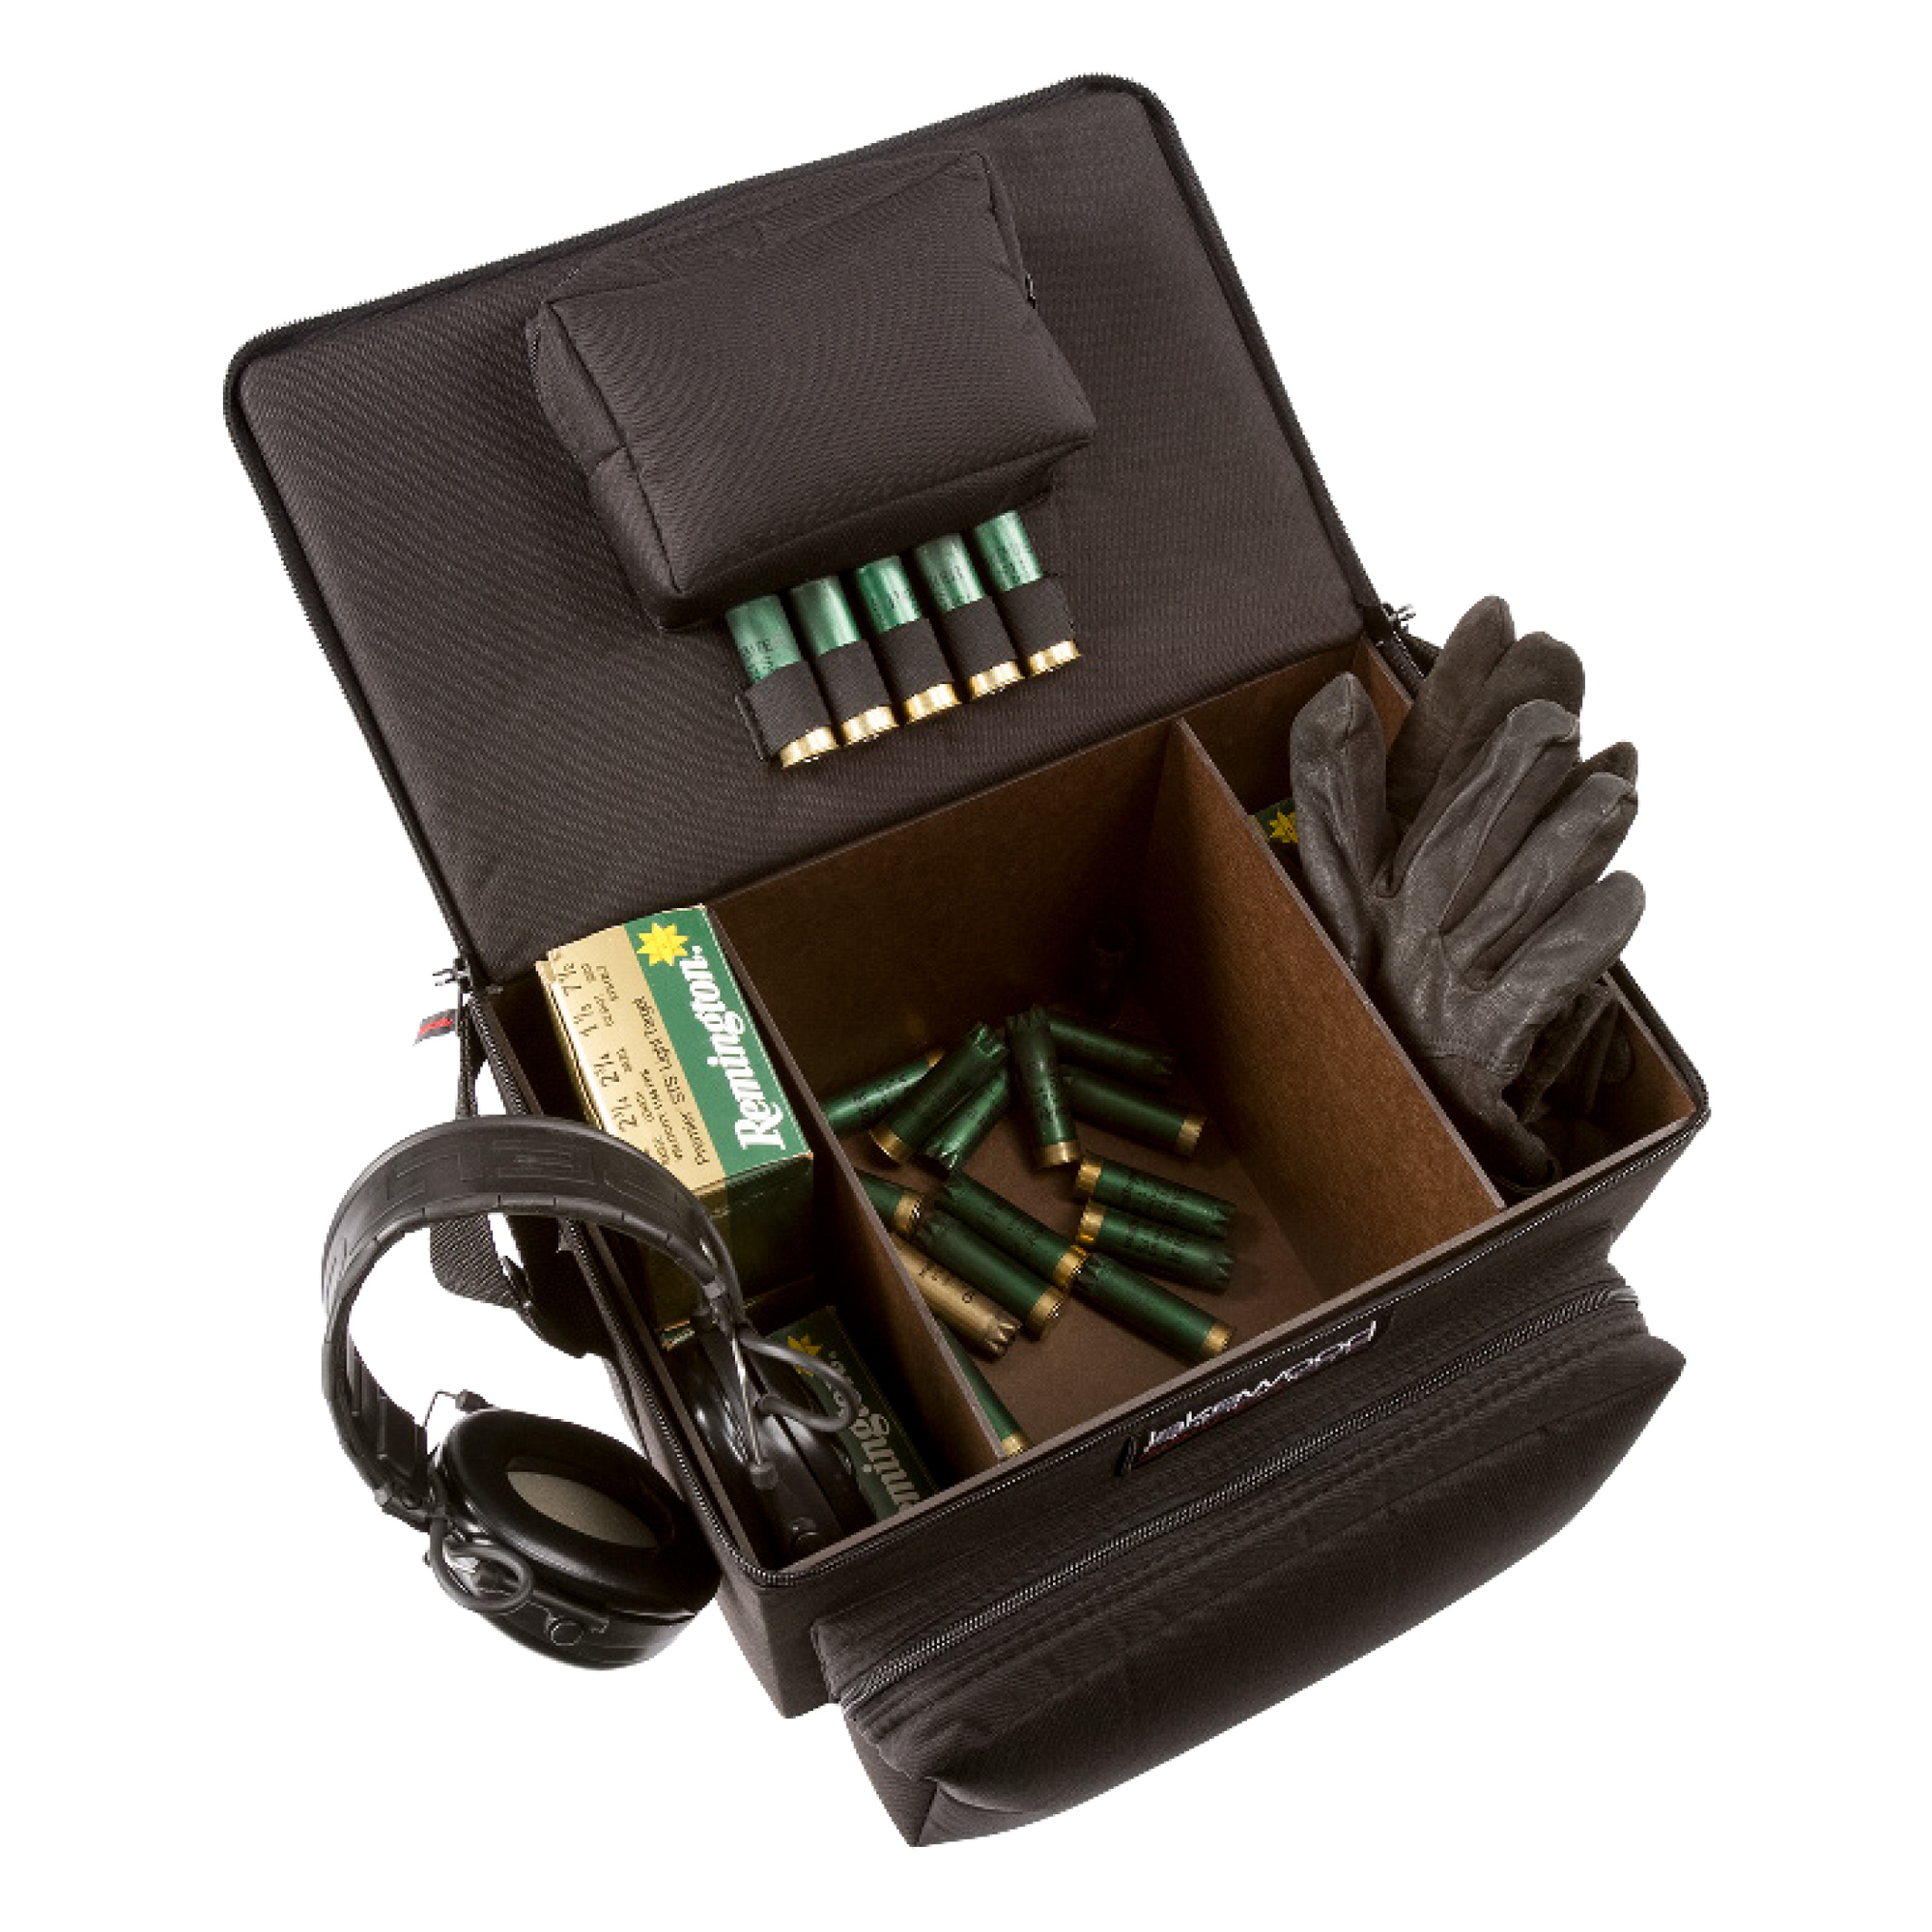 The Clay Shooter Case from Lakewood Products has side compartments that hold four boxes of shells each – 200 total shells Center compartment holds 200 empty shells Storage pocket and large exterior pocket for your glasses, gloves, ear protection, tools, etc. It floats (when zipped up) even when full of shells. Adjustable shoulder strap. Made in the USA. Lifetime Warranty.